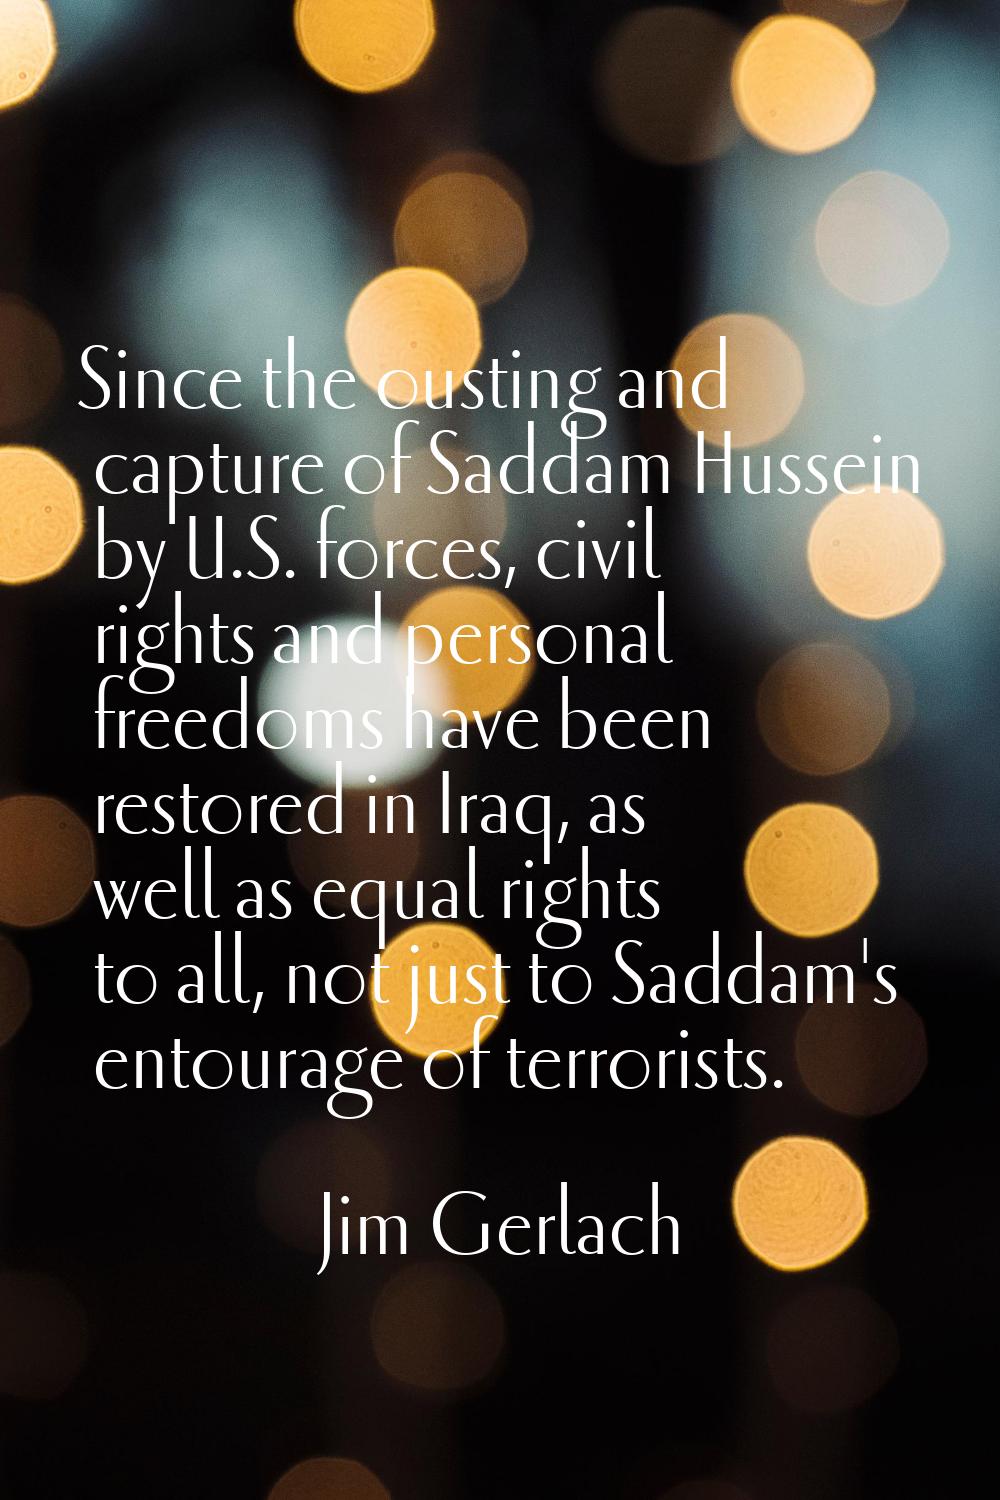 Since the ousting and capture of Saddam Hussein by U.S. forces, civil rights and personal freedoms 